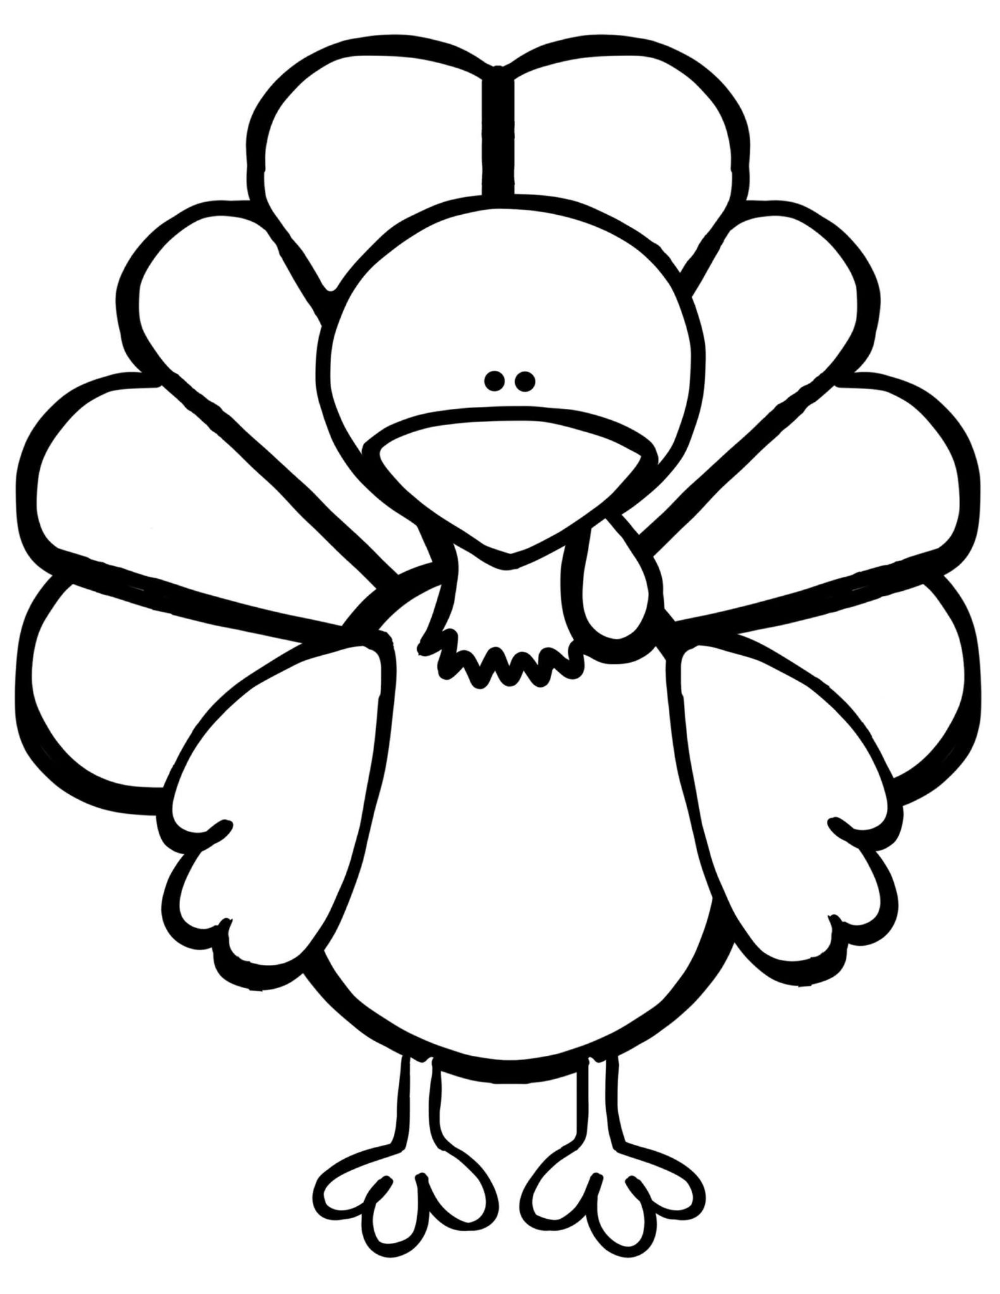 Blank Turkey Template Sample Professional Template With Blank Turkey Template Turkey Art Turkey Disguise Turkey Disguise Project